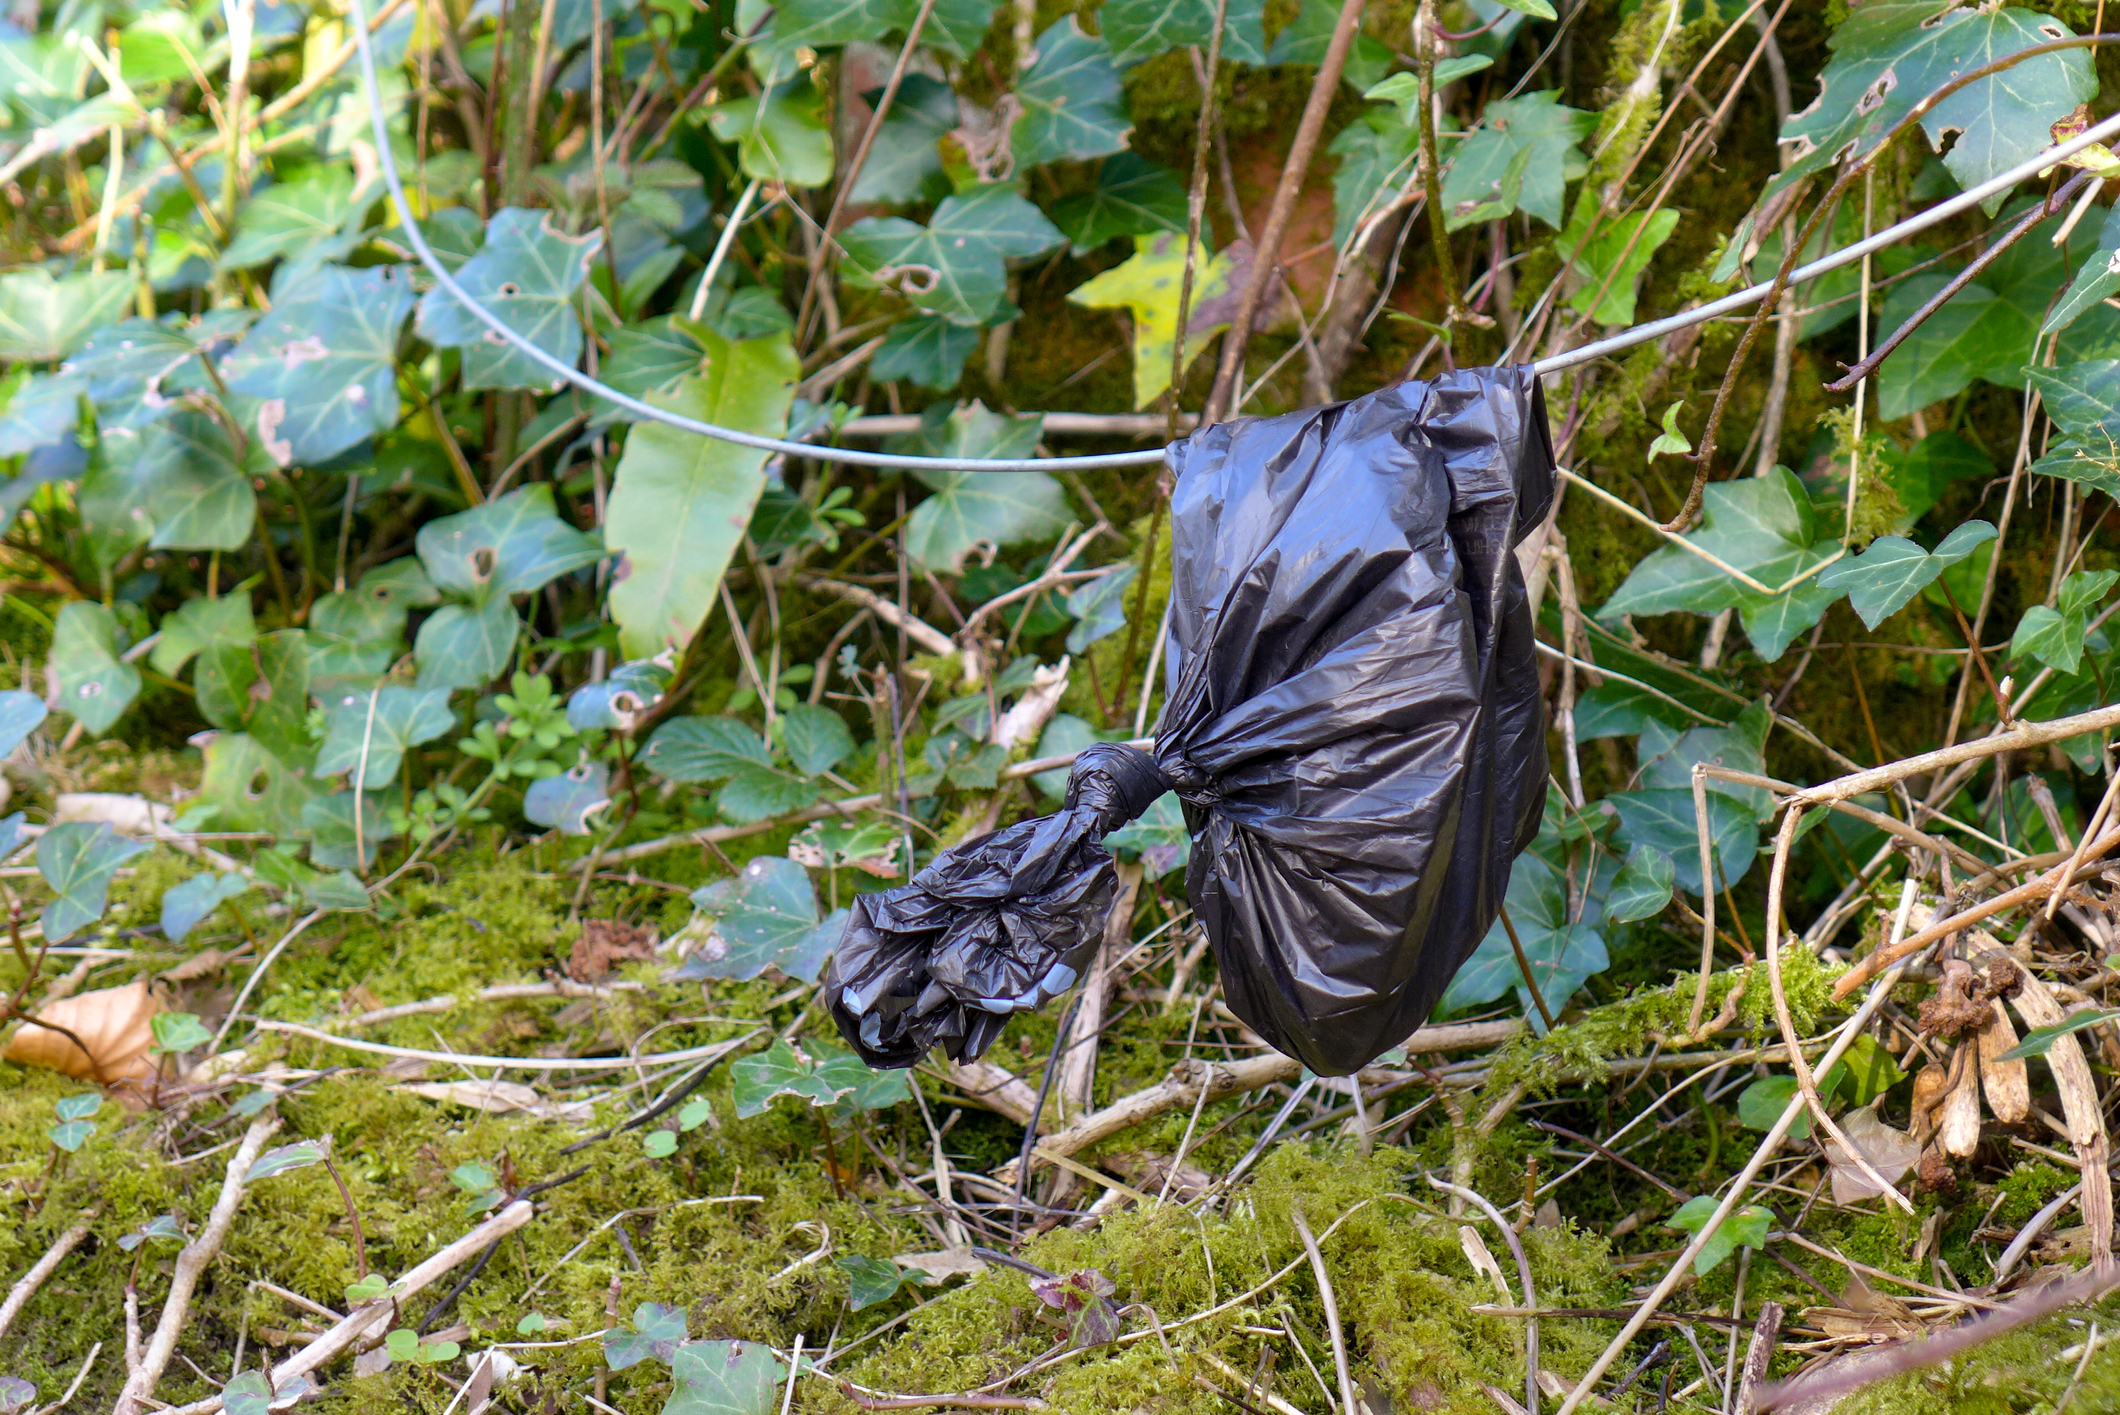 A doggy poop bag thrown out and attached on trees